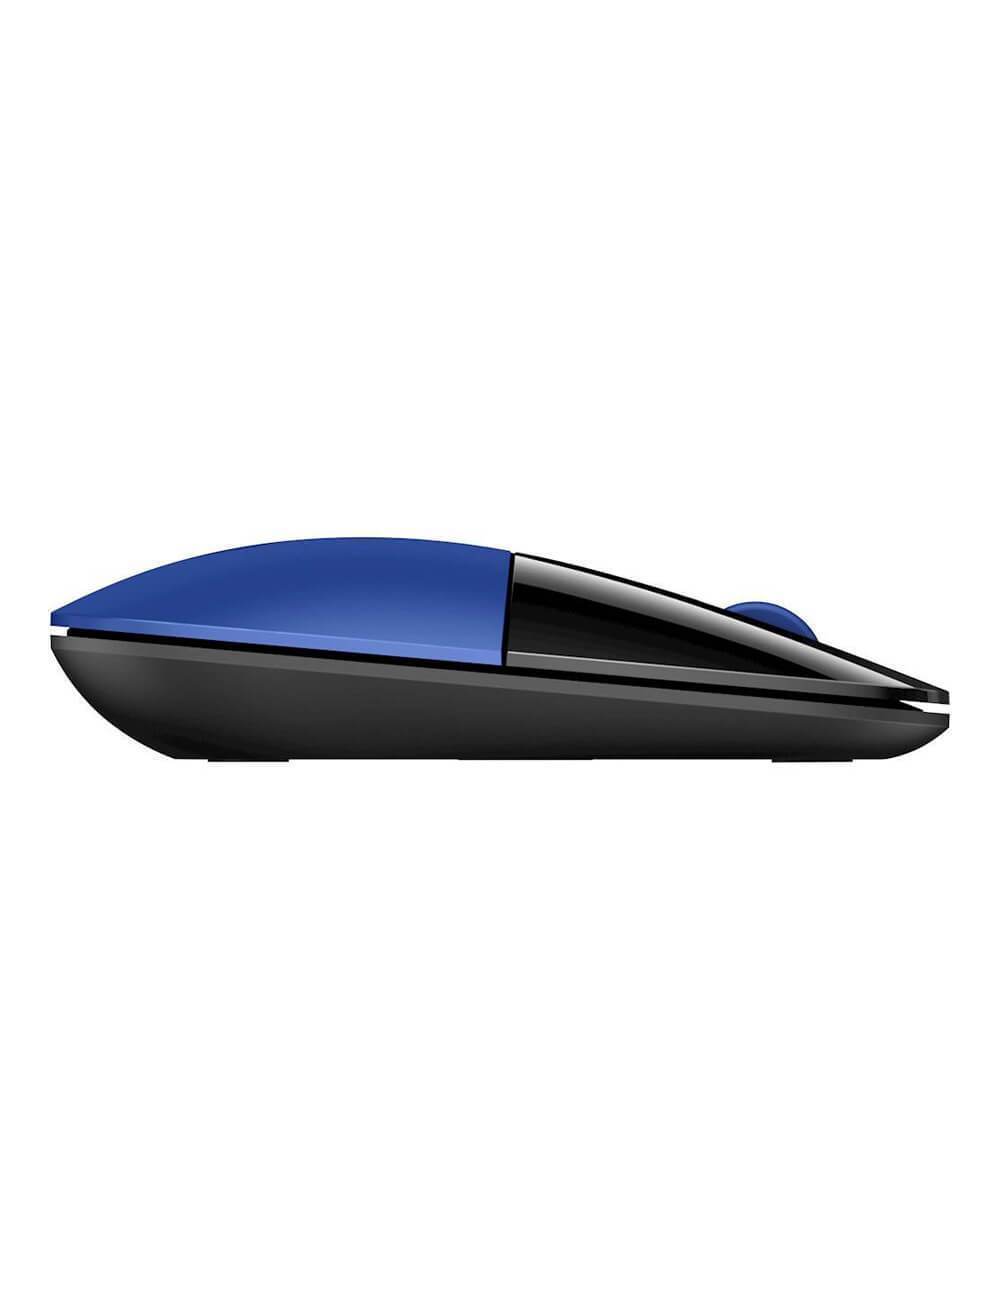 Bluetooth Mobile Mouse